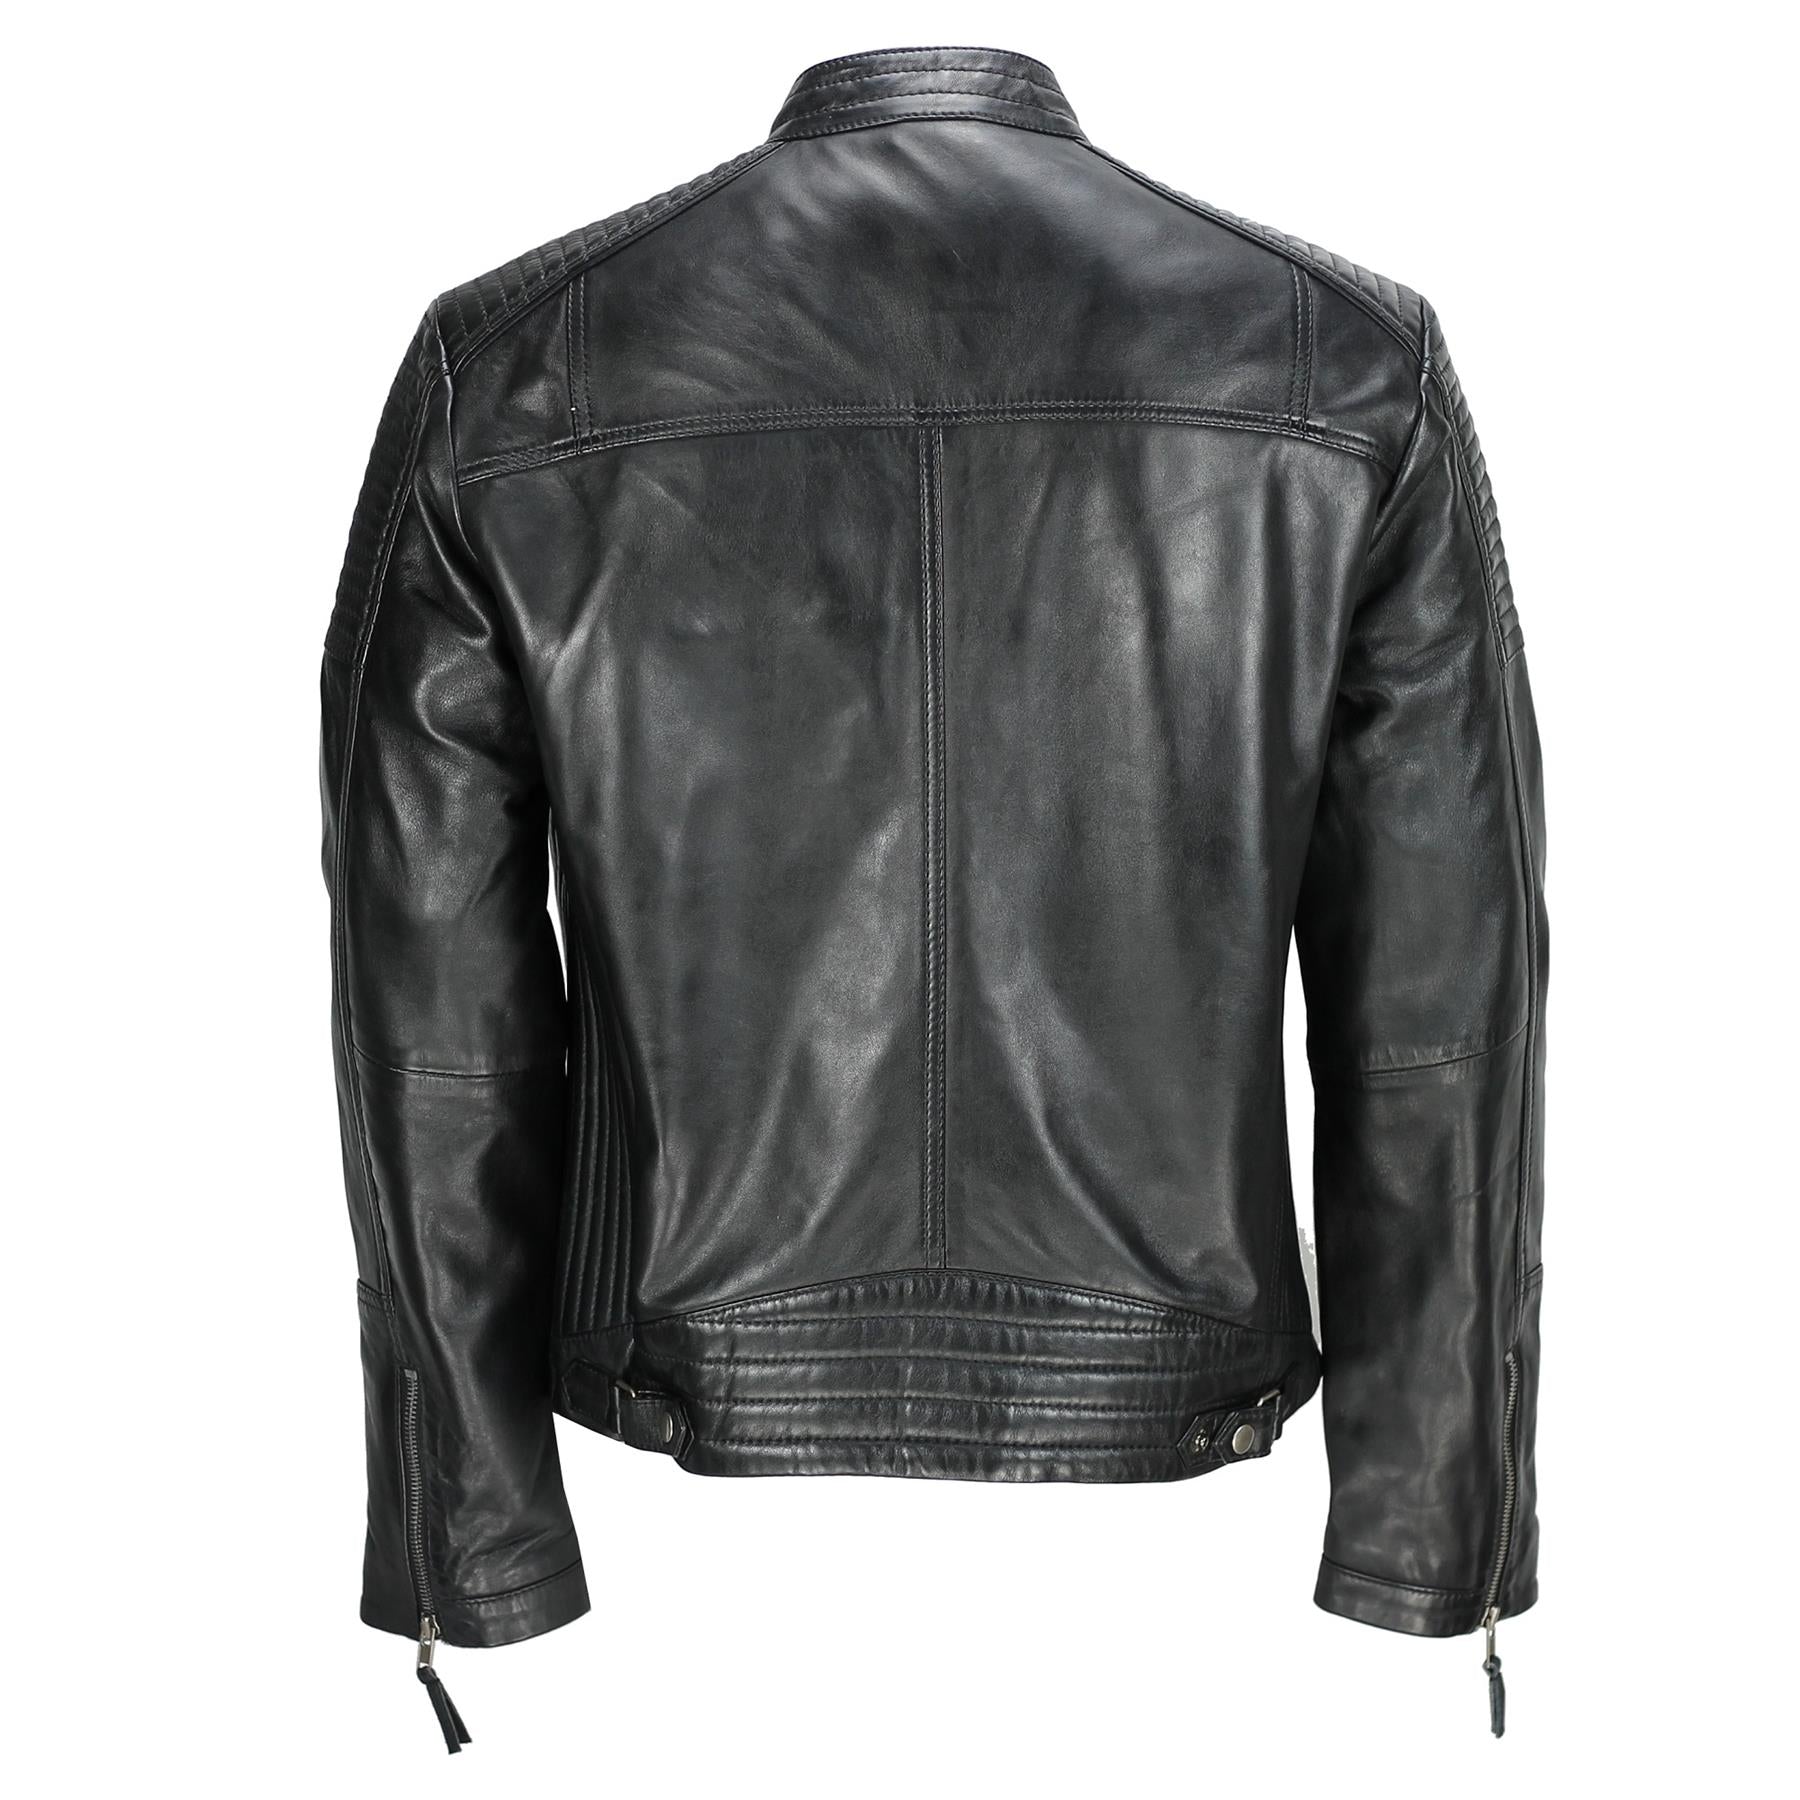 Mens New Black Real Leather Vintage Biker Style Zipped Smart Casual Retro Jacket